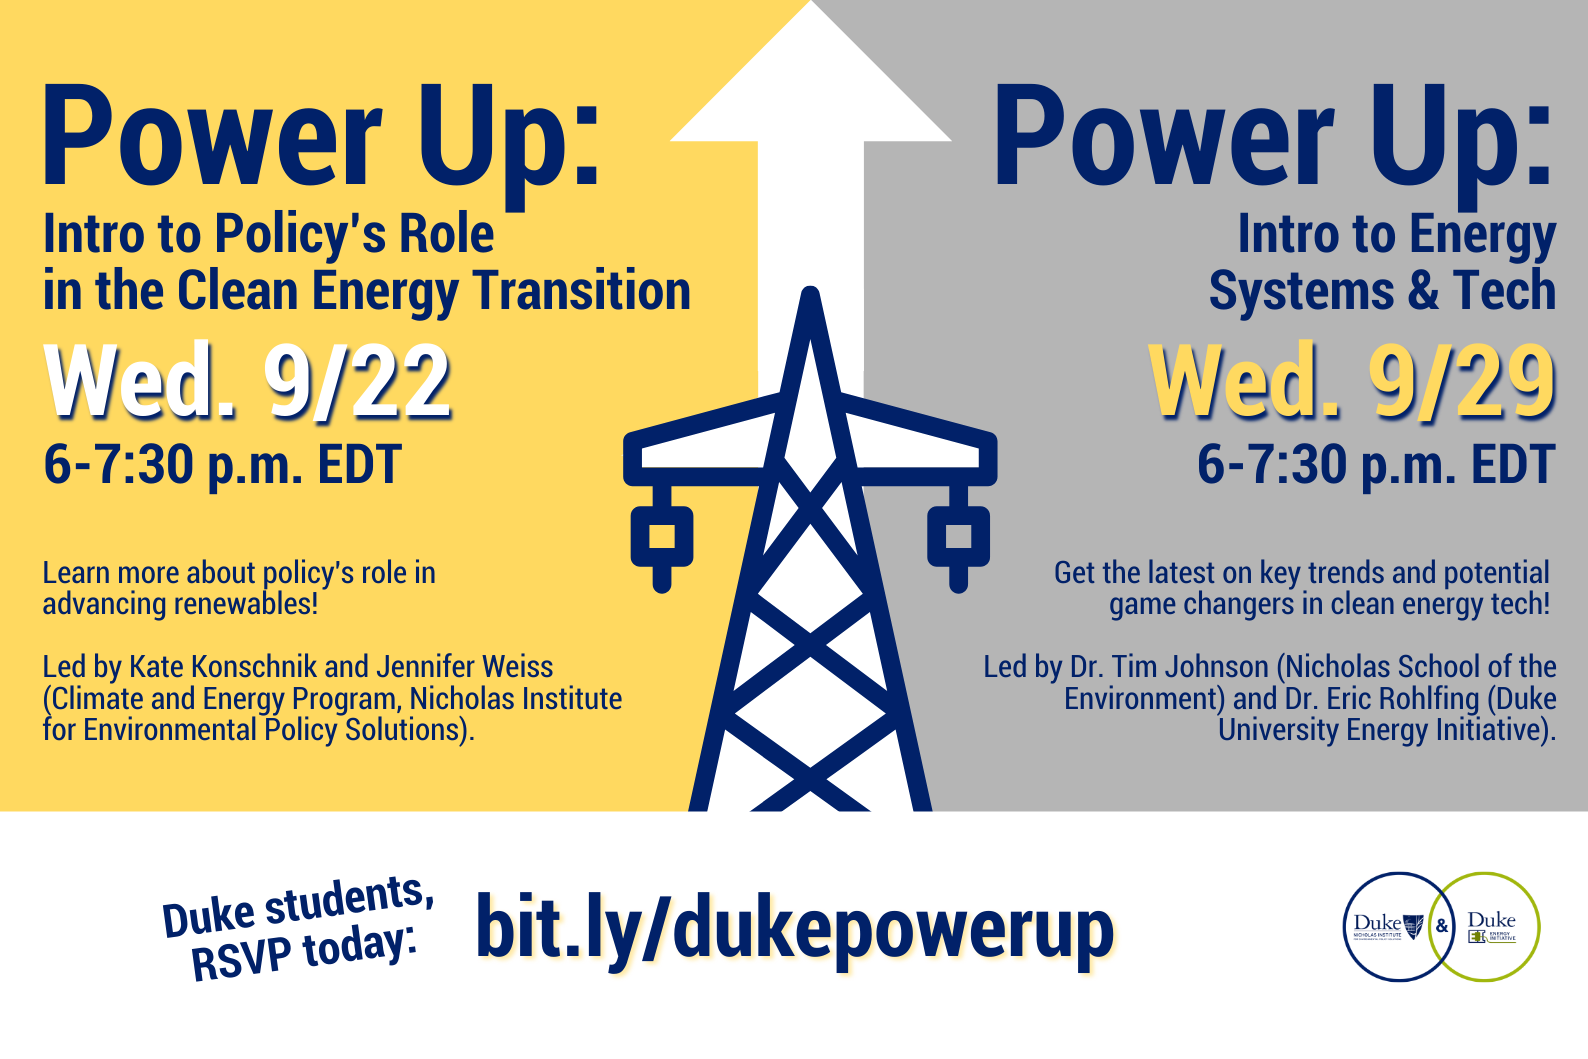 Text: &amp;amp;quot;Power Up: Intro to Policy&amp;amp;#39;s Role in the Clean Energy Transition - Wed/ 9/22 6-7:30 p.m. EDT Learn more about policy&amp;amp;#39;s role in advancing renewables! Led by Kate Konschnik and Jennifer Weiss (Climate and Energy Program, Nicholas Institute for Environmental Policy Solutions).&amp;amp;quot; Right side: &amp;amp;quot; Power Up: Intro to Energy Systems &amp;amp;amp; Tech Wed. 9/29 6-7:30 p.m. EDT Get the latest on key trends and potential game changers in clean energy